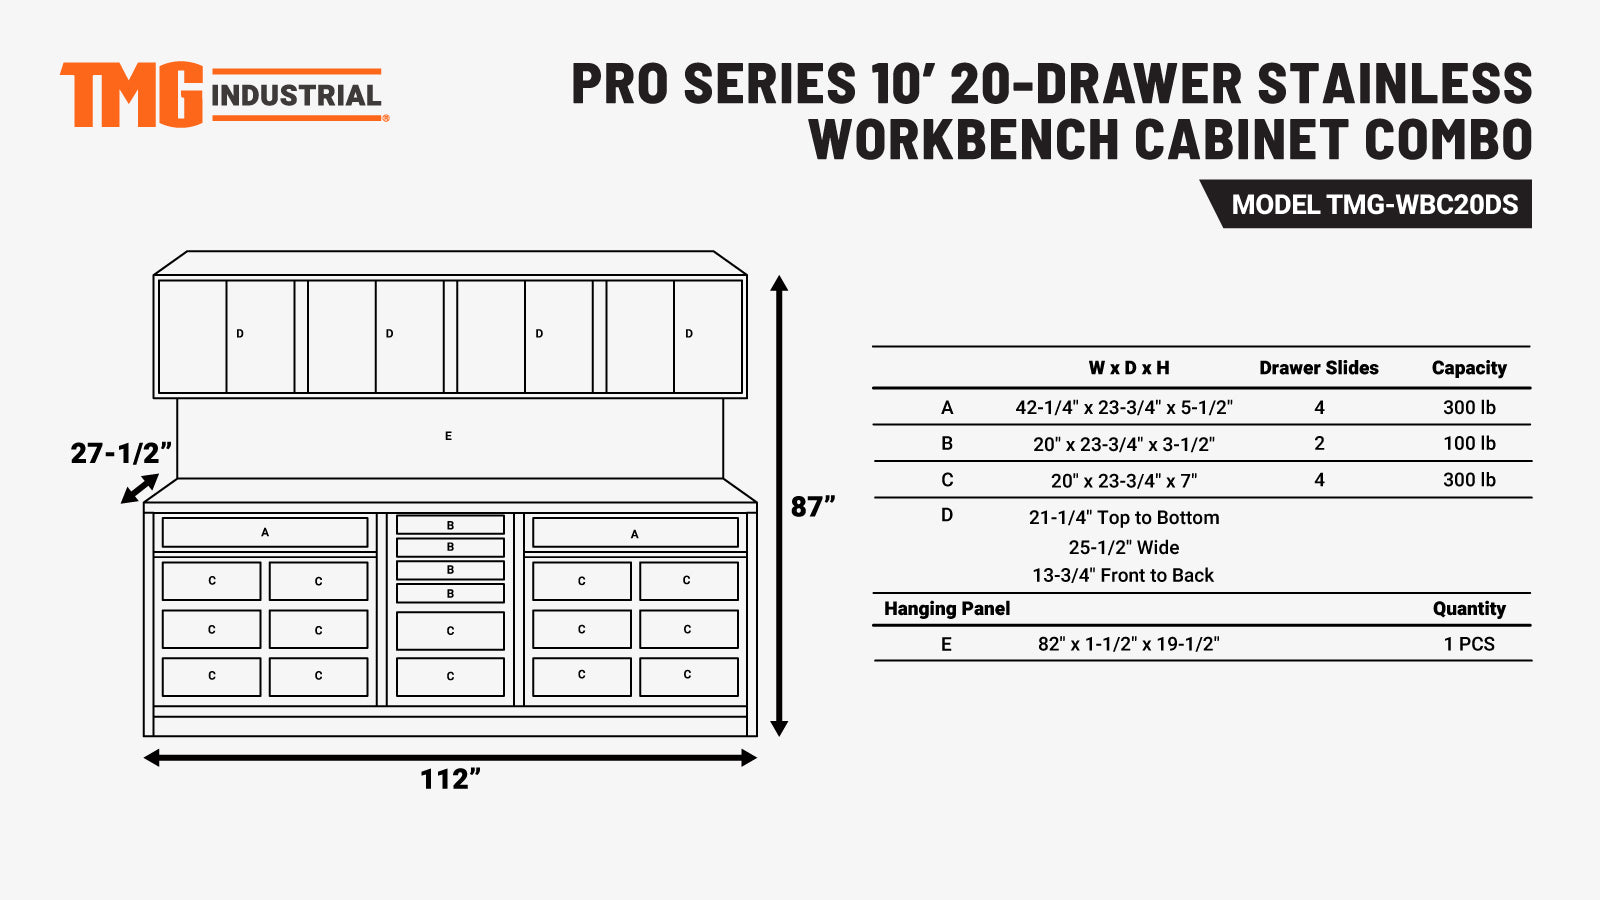 TMG Industrial Pro Series 10-FT 20 Drawer Stainless Steel Workbench Cabinet Combo, Stainless Steel Tabletop, Pegboard and Drawer Fronts, 20 Lockable Drawers, Wall-Mounted Cabinets, Adjustable Shelving, Fully All-in-one Welded Frame, TMG-WBC20DS-specifications-image